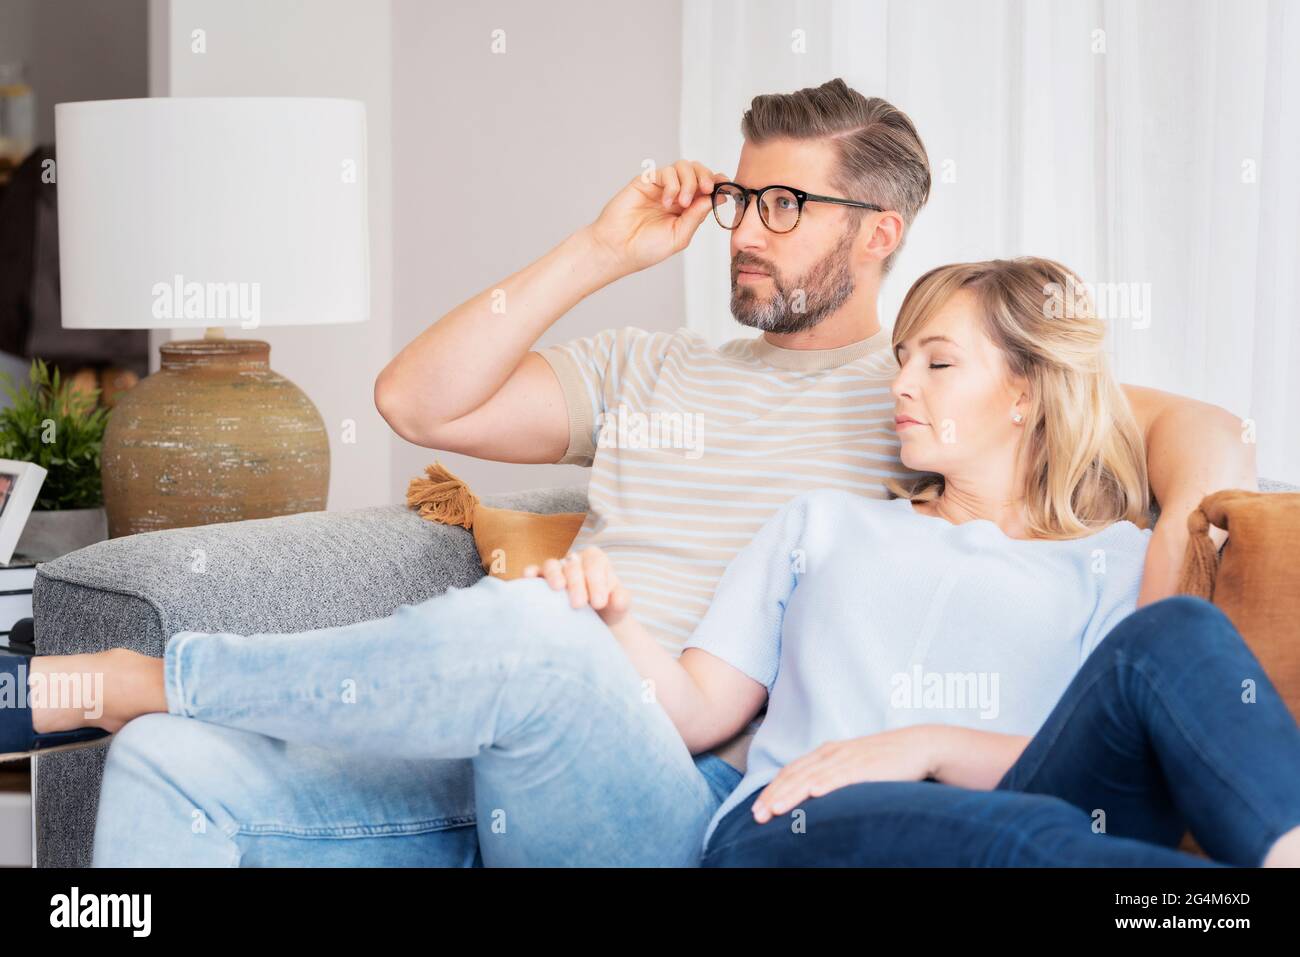 Shot of an affection couple relaxing together in their living room at home. Handsome man watching tv while her beautiful wife napping next to him. Stock Photo